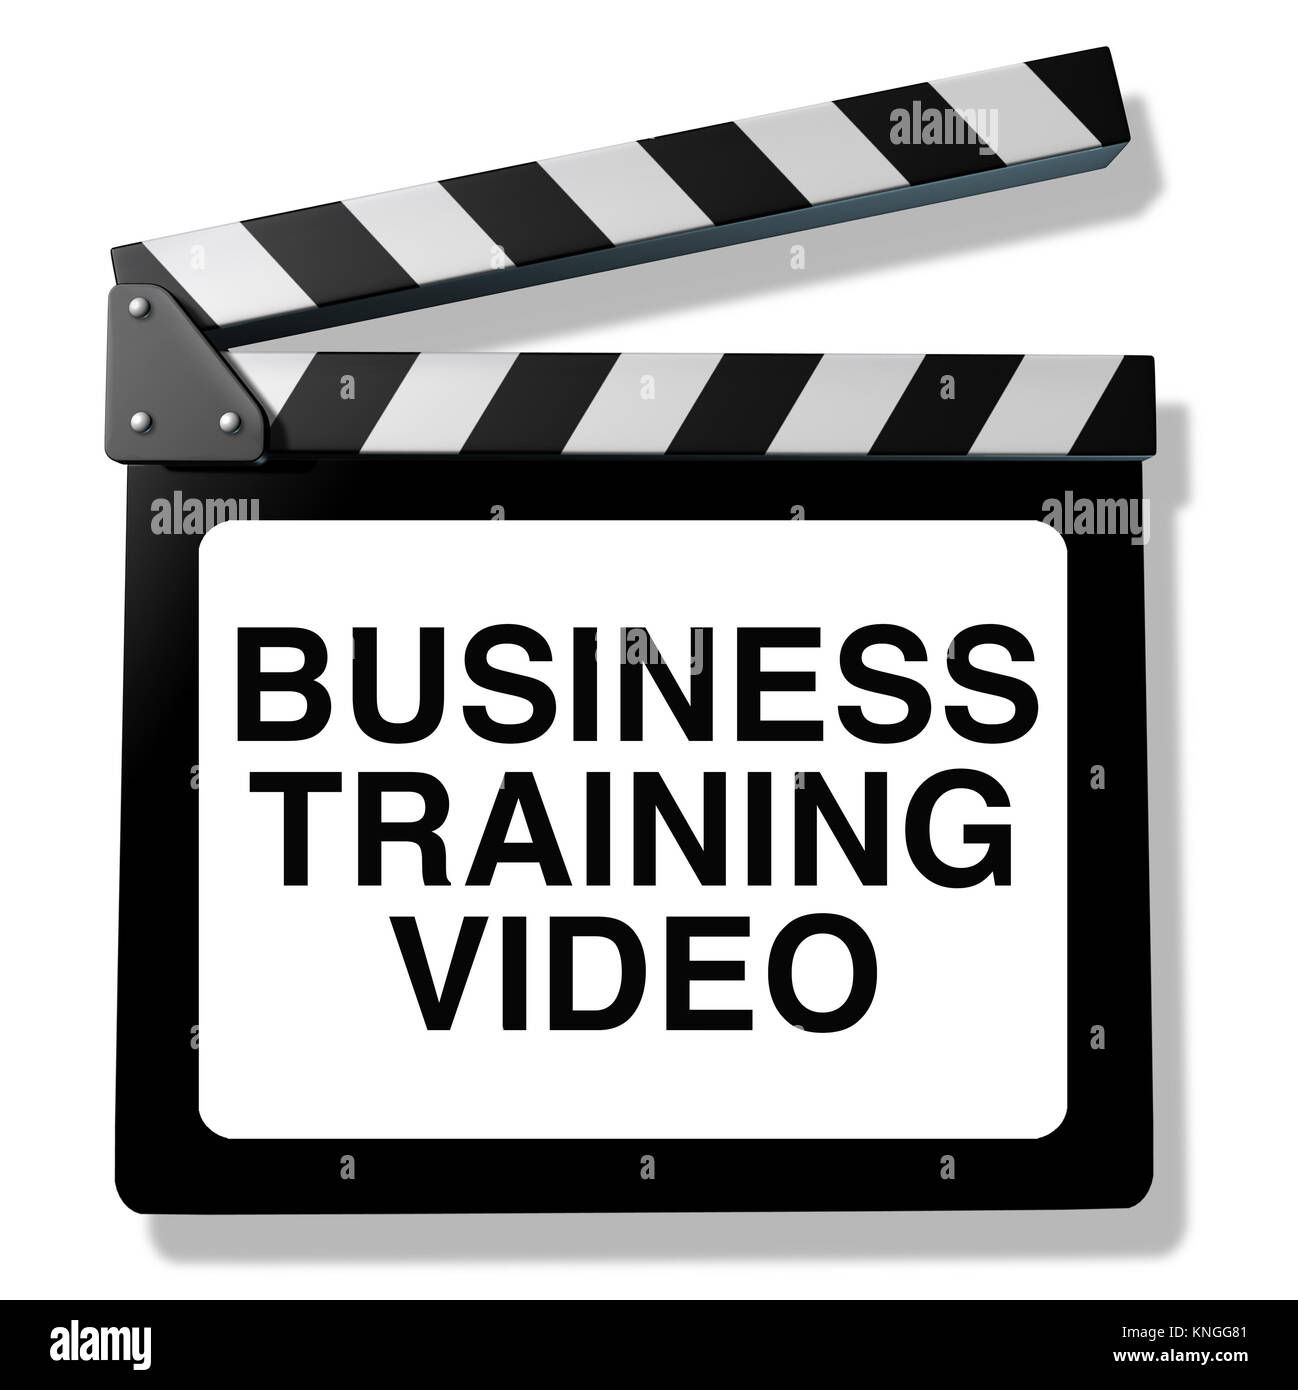 Business training video and employee instruction course as a 3D illustration skills training and instructional program. Stock Photo